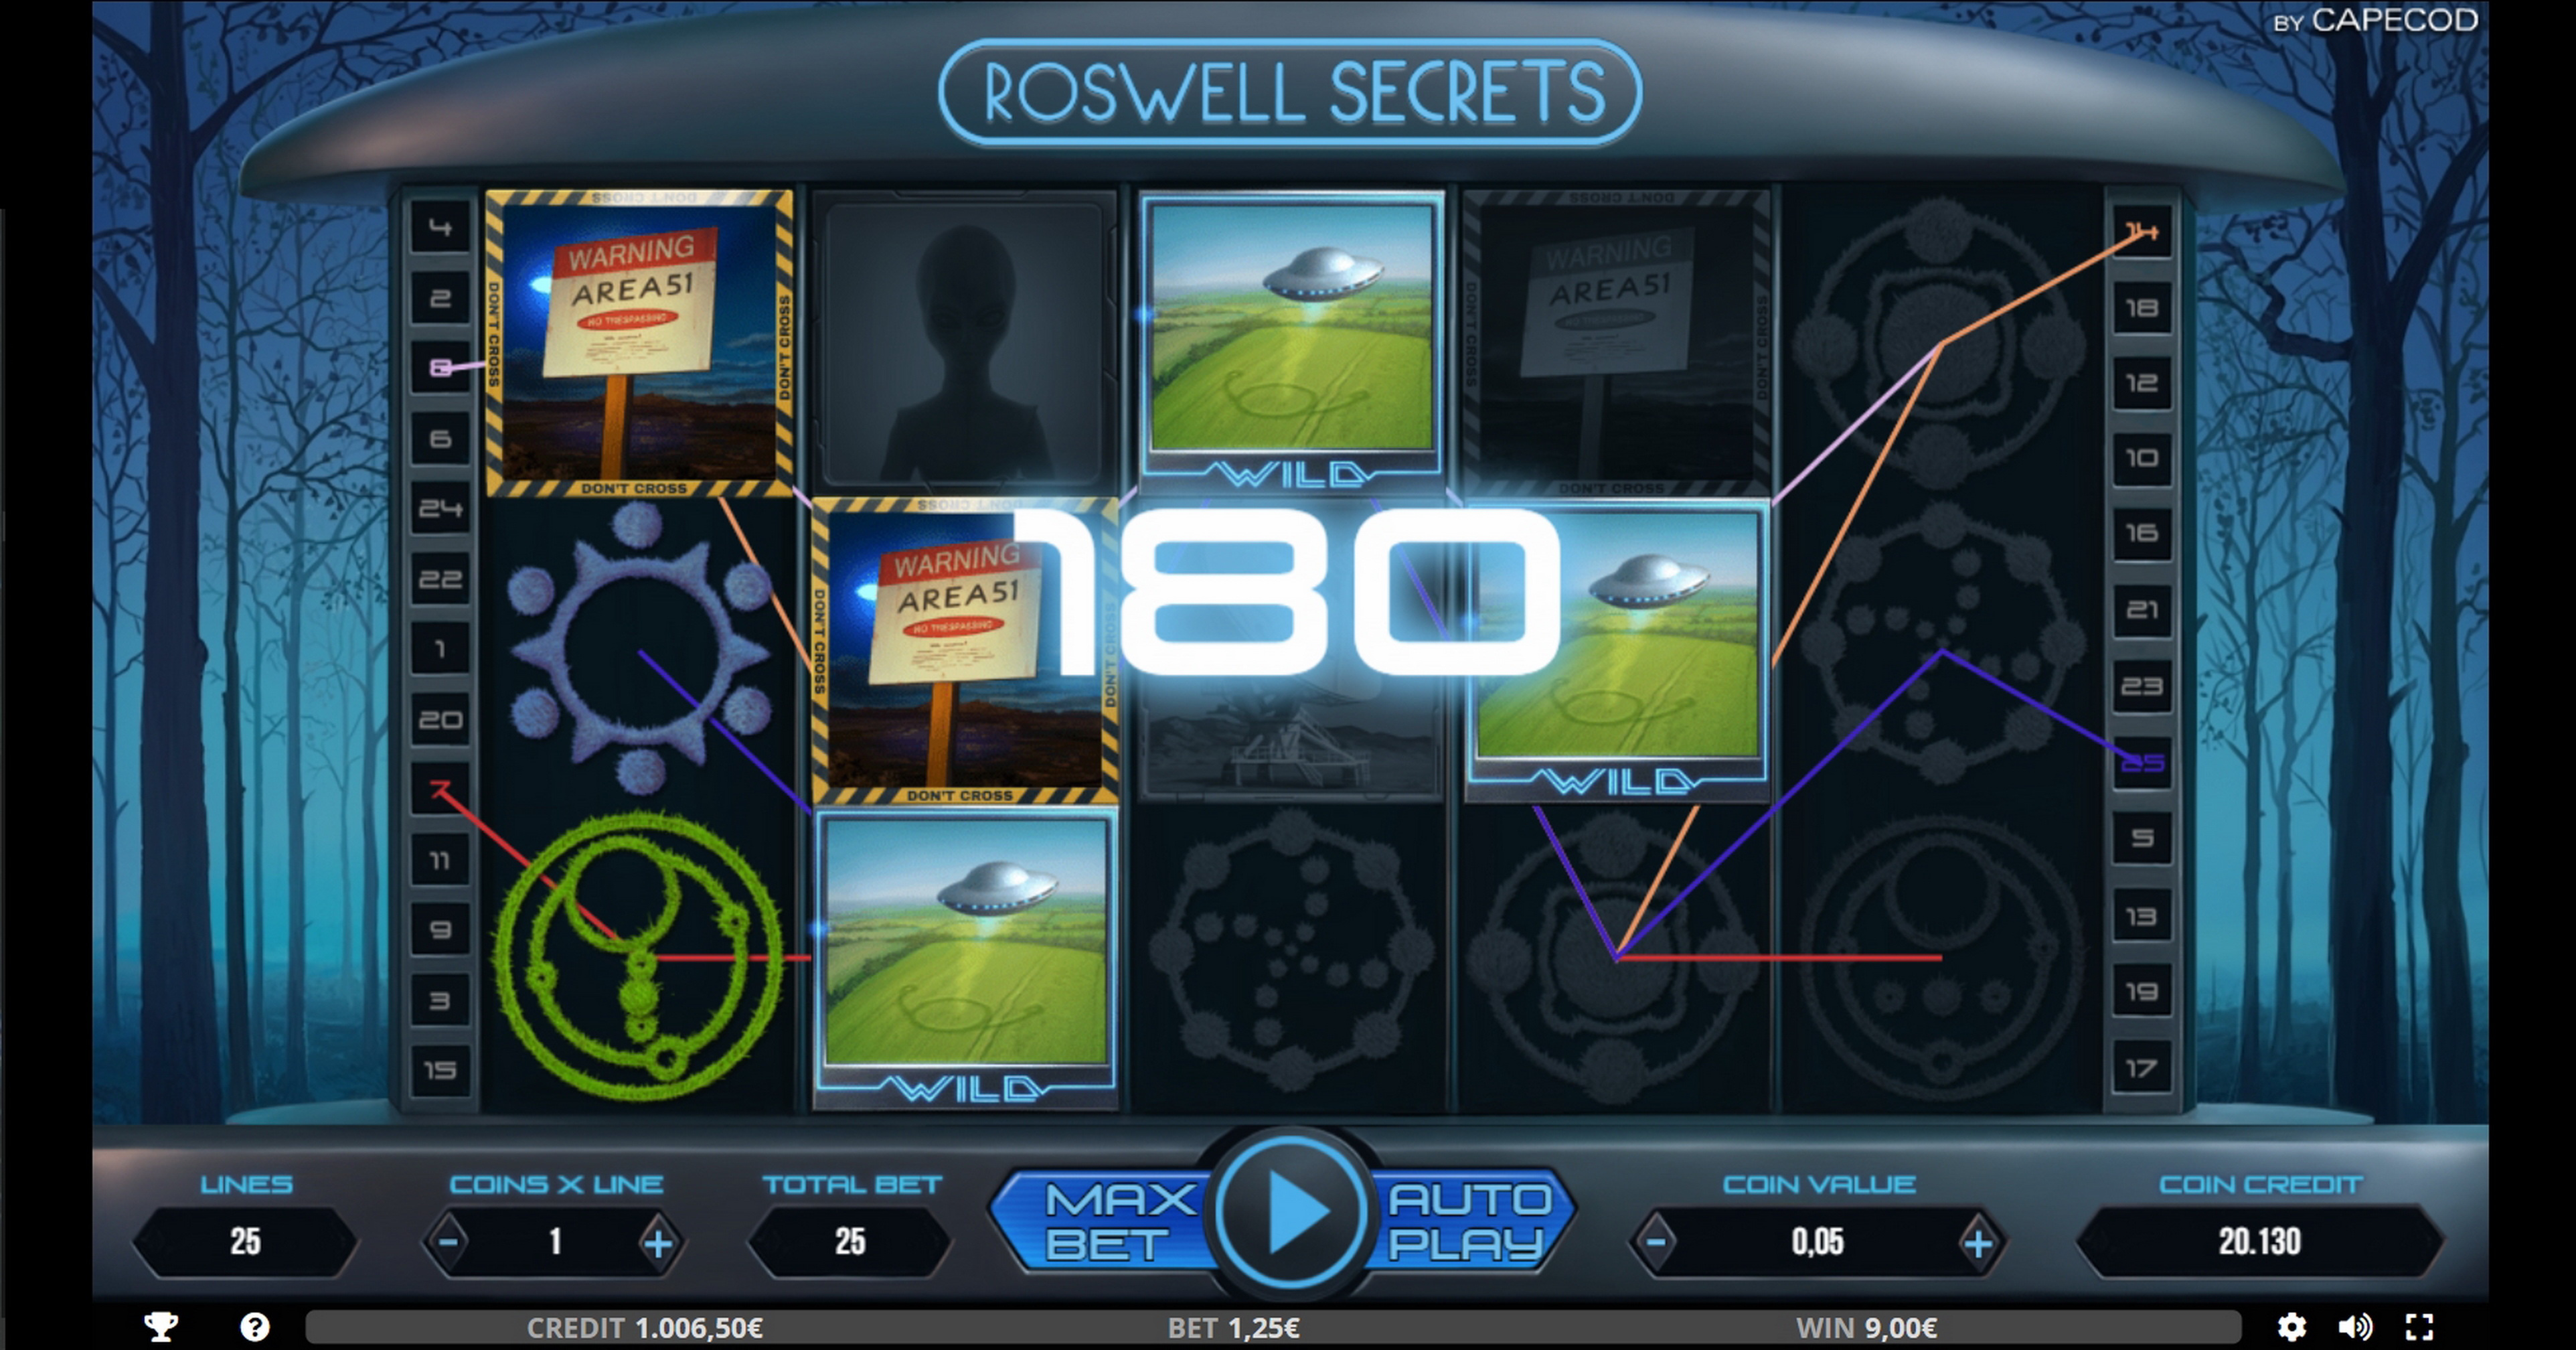 Win Money in Roswell Secrets Free Slot Game by Capecod Gaming